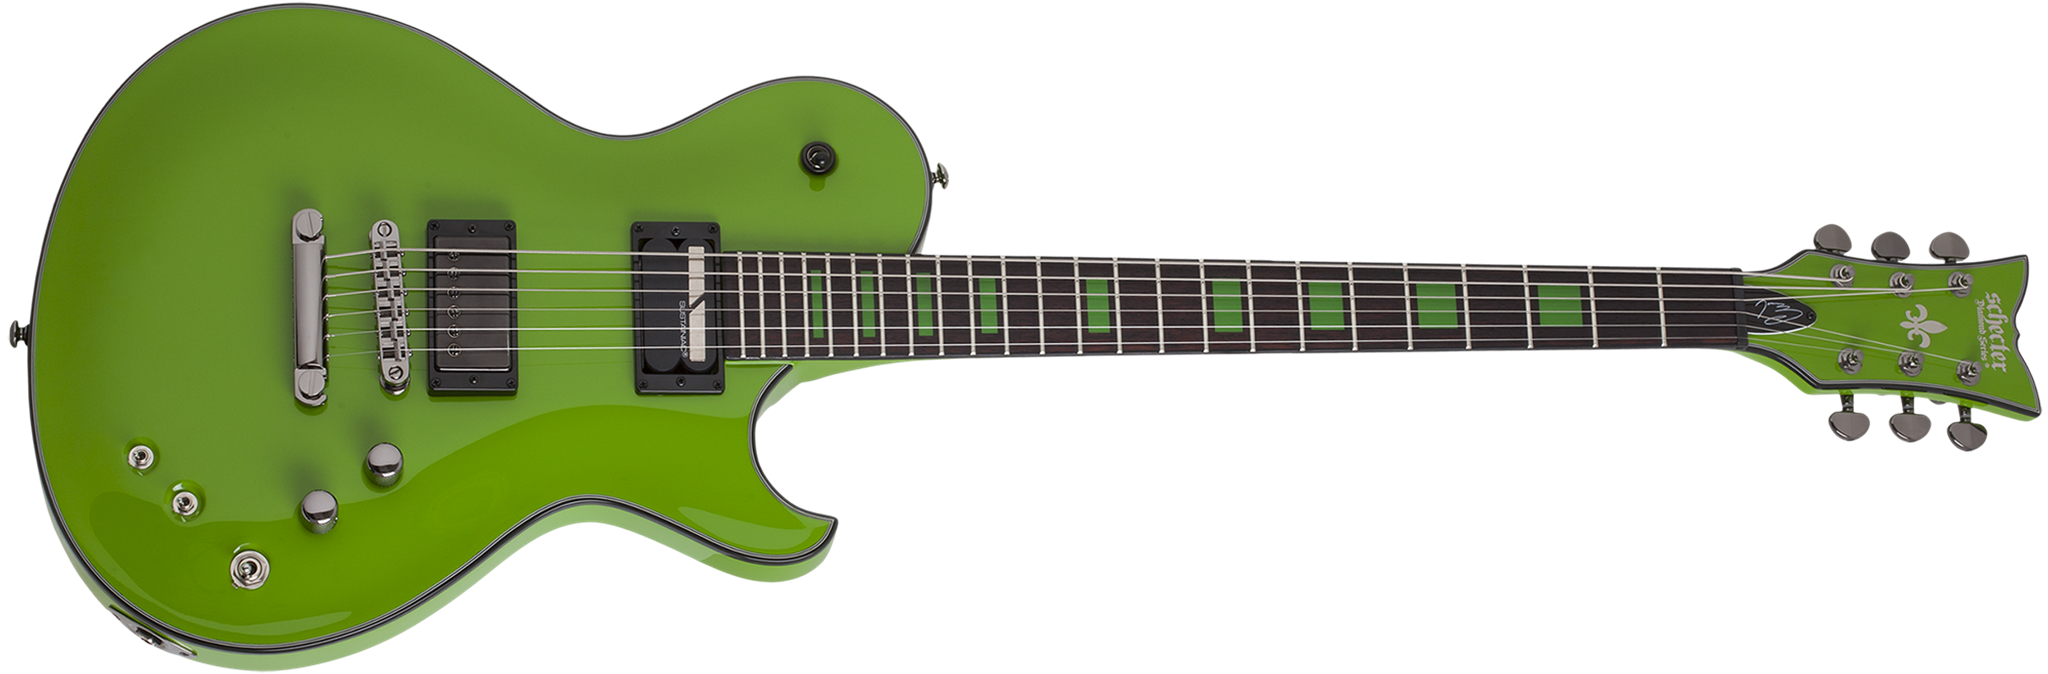 Schecter DIAMOND SERIES Kenny Hickey Solo-6 EX/S Steele Green 6-String Electric Guitar 2022